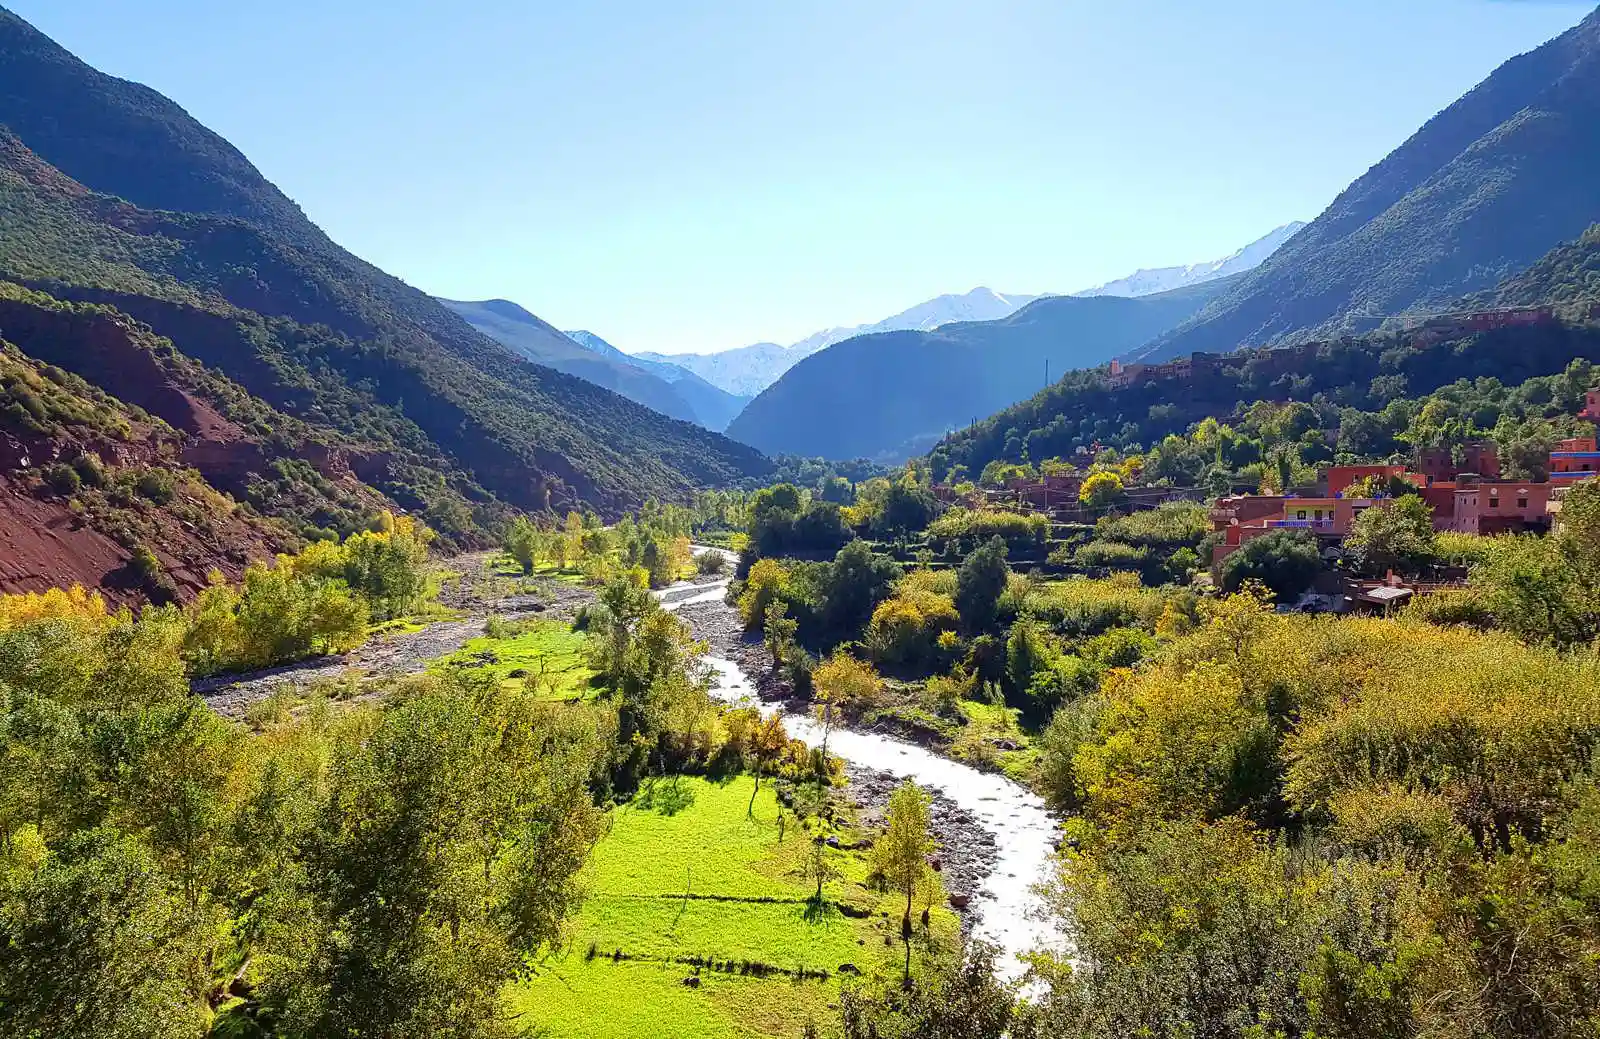 Ourika Valley Excursion from Marrakech